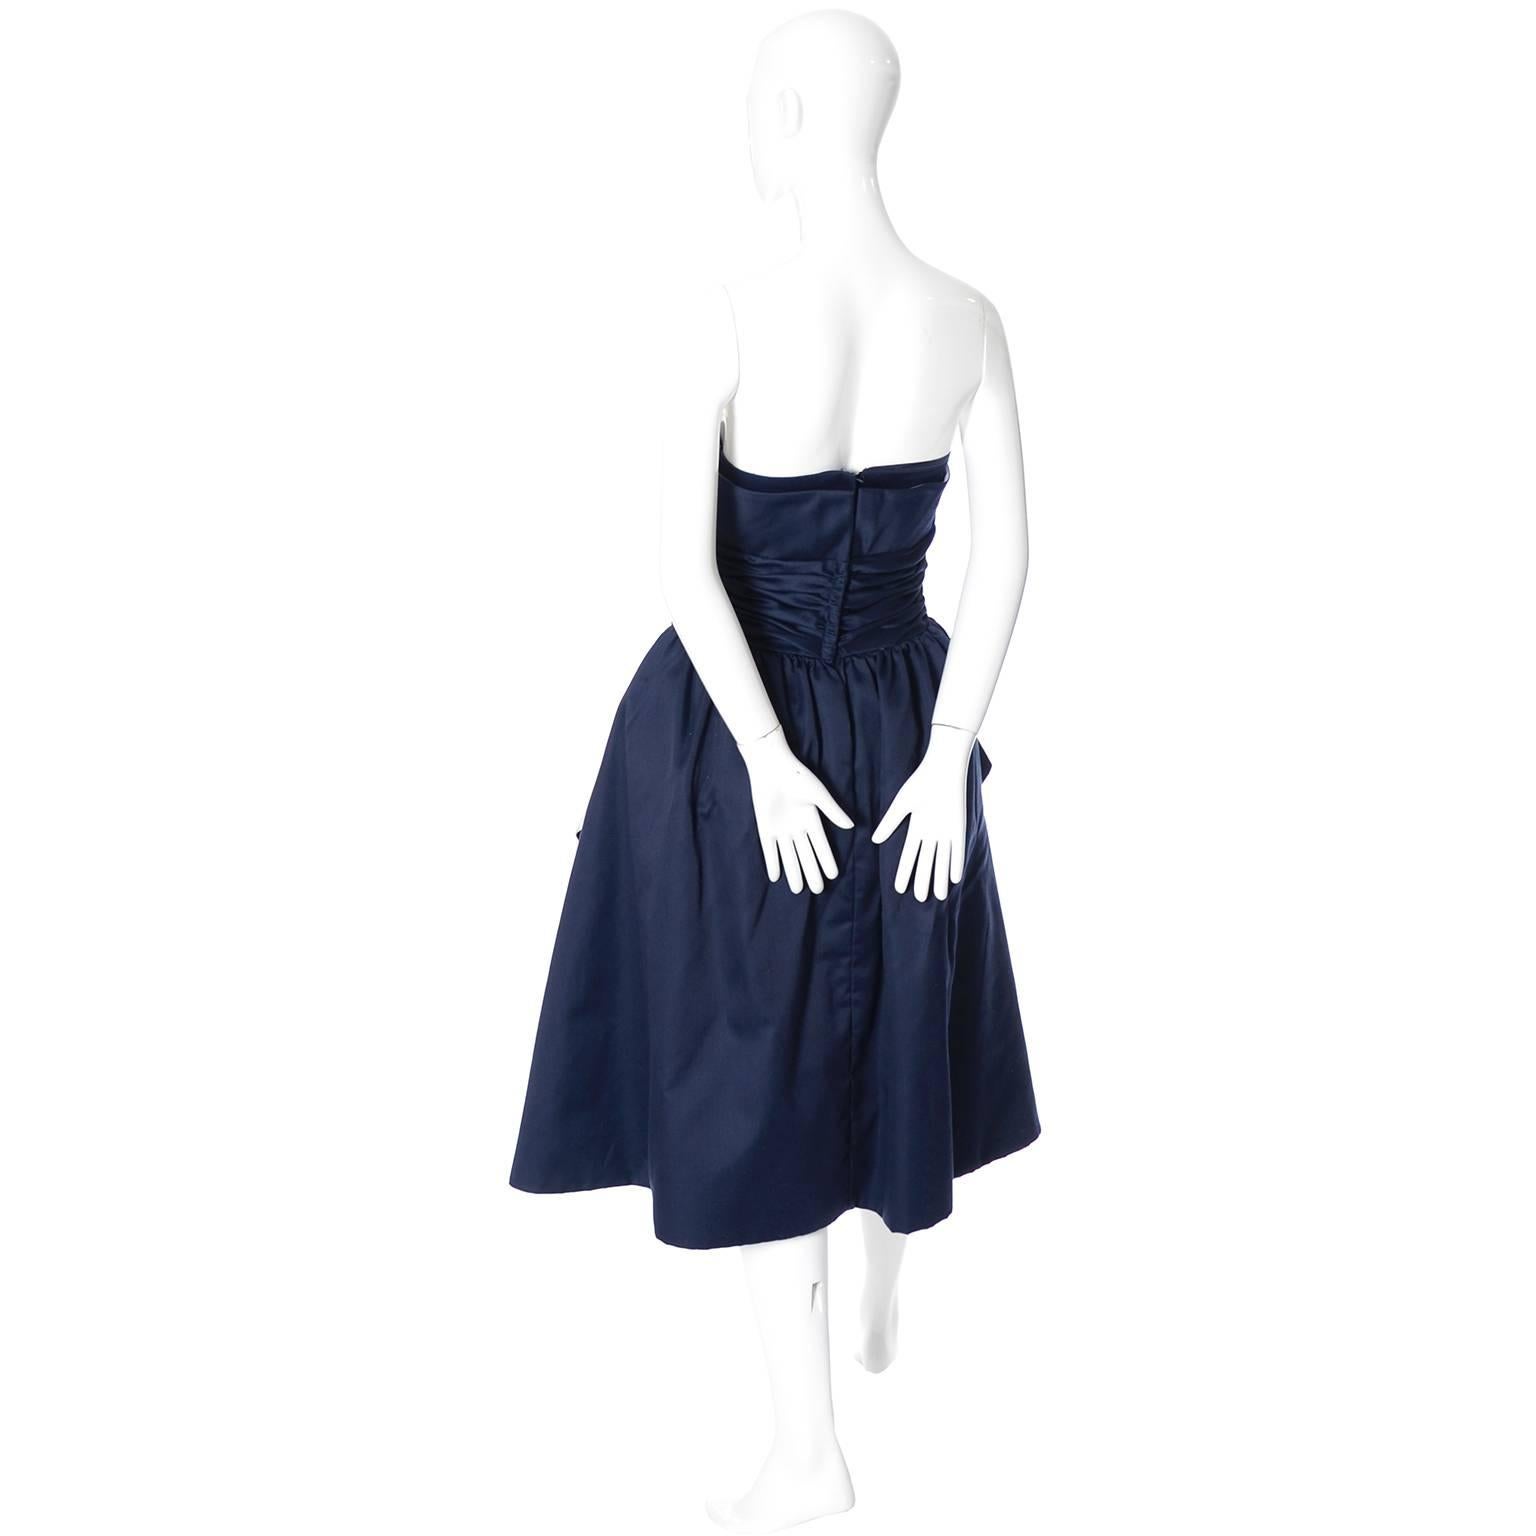 Gray 1980s Victor Costa Neiman Marcus Vintage Dress Strapless Blue and White